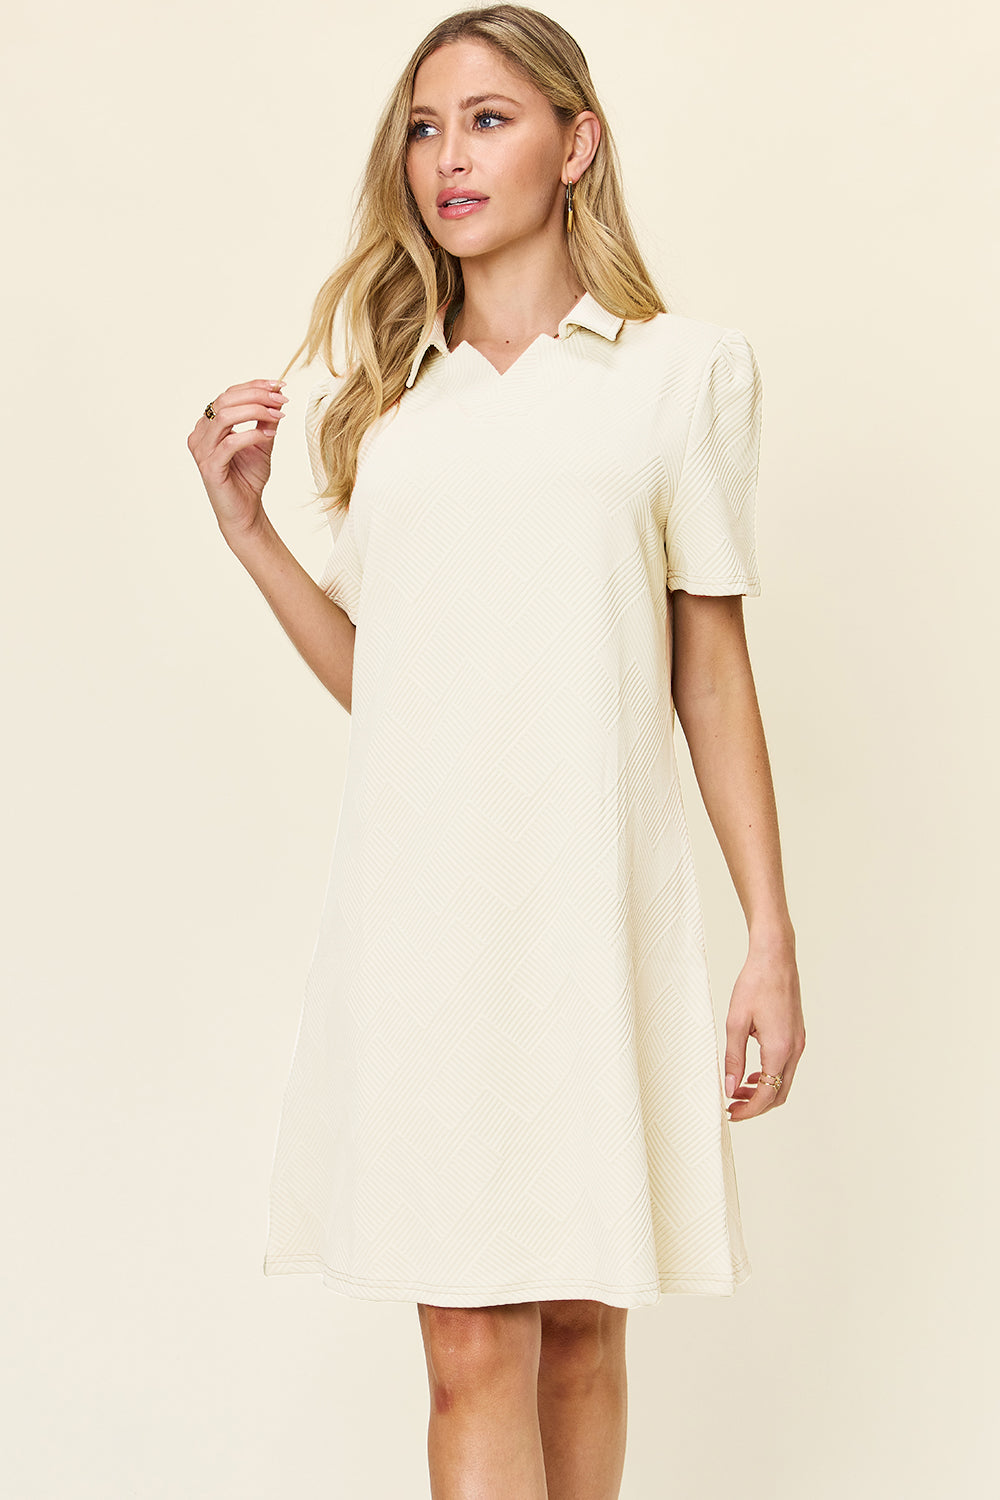 Double Take Full Size Texture Collared Neck Short Sleeve Dress Cream